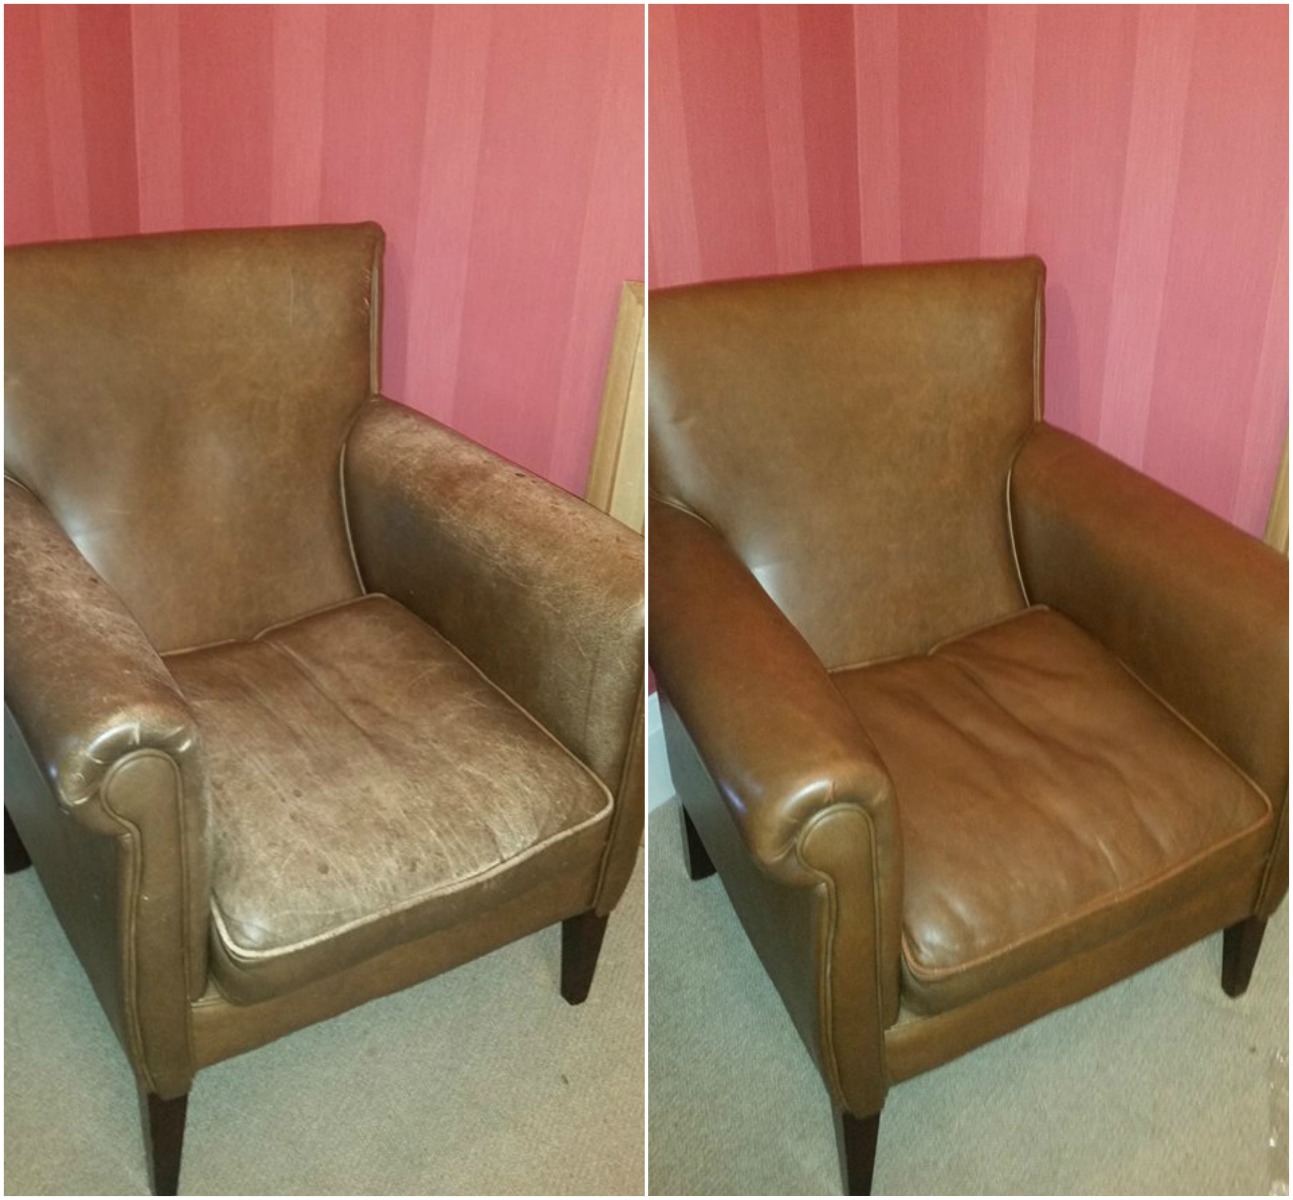 Restoring Colour To A Faded Leather Sofa, Can You Recover A Leather Recliner